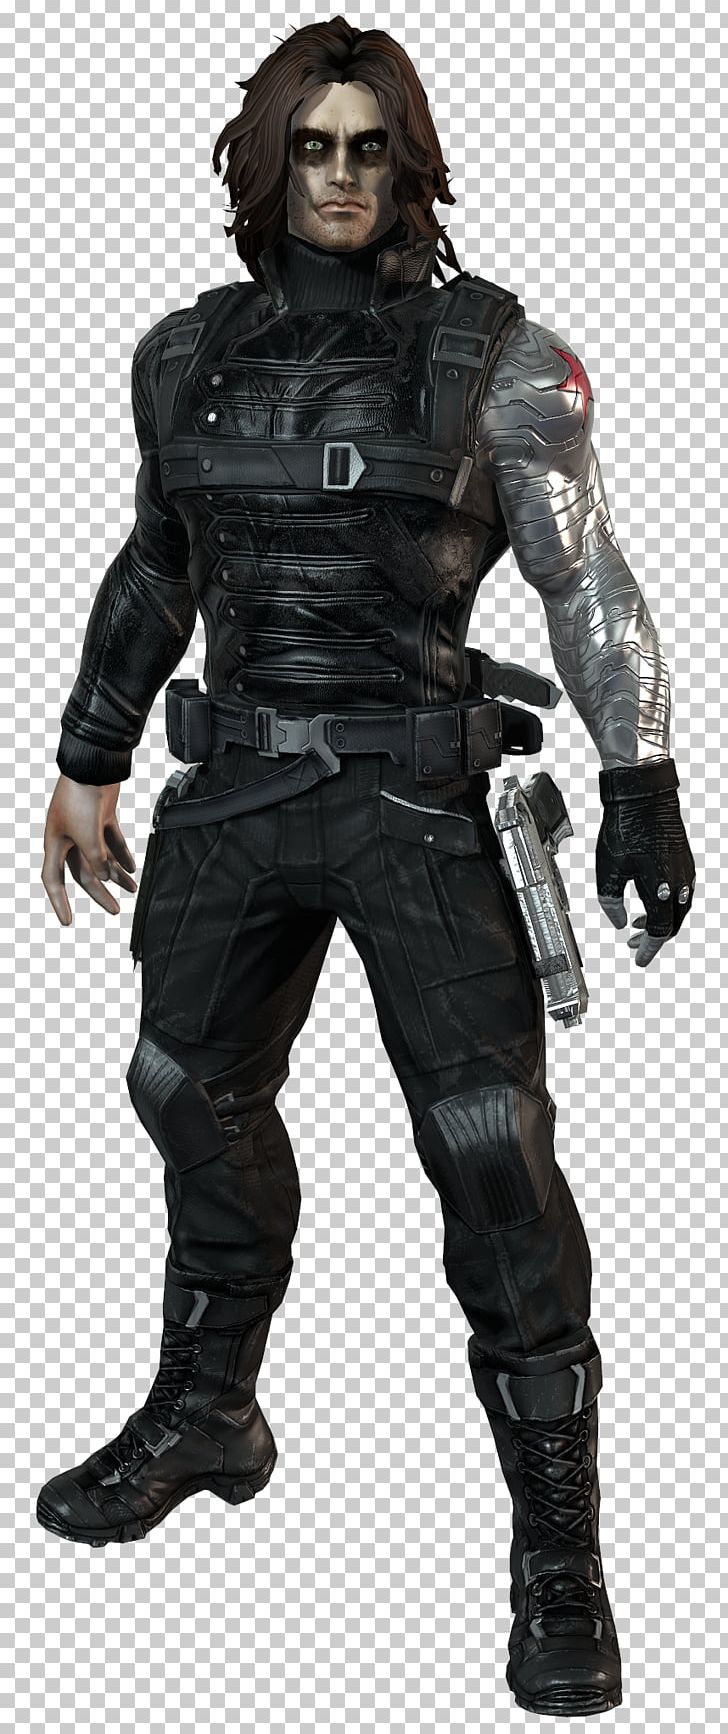 Captain America: The Winter Soldier Marvel Heroes 2016 Bucky Barnes Black Widow PNG, Clipart, Action Figure, Captain America, Captain America The Winter Soldier, Comic, Comics Free PNG Download